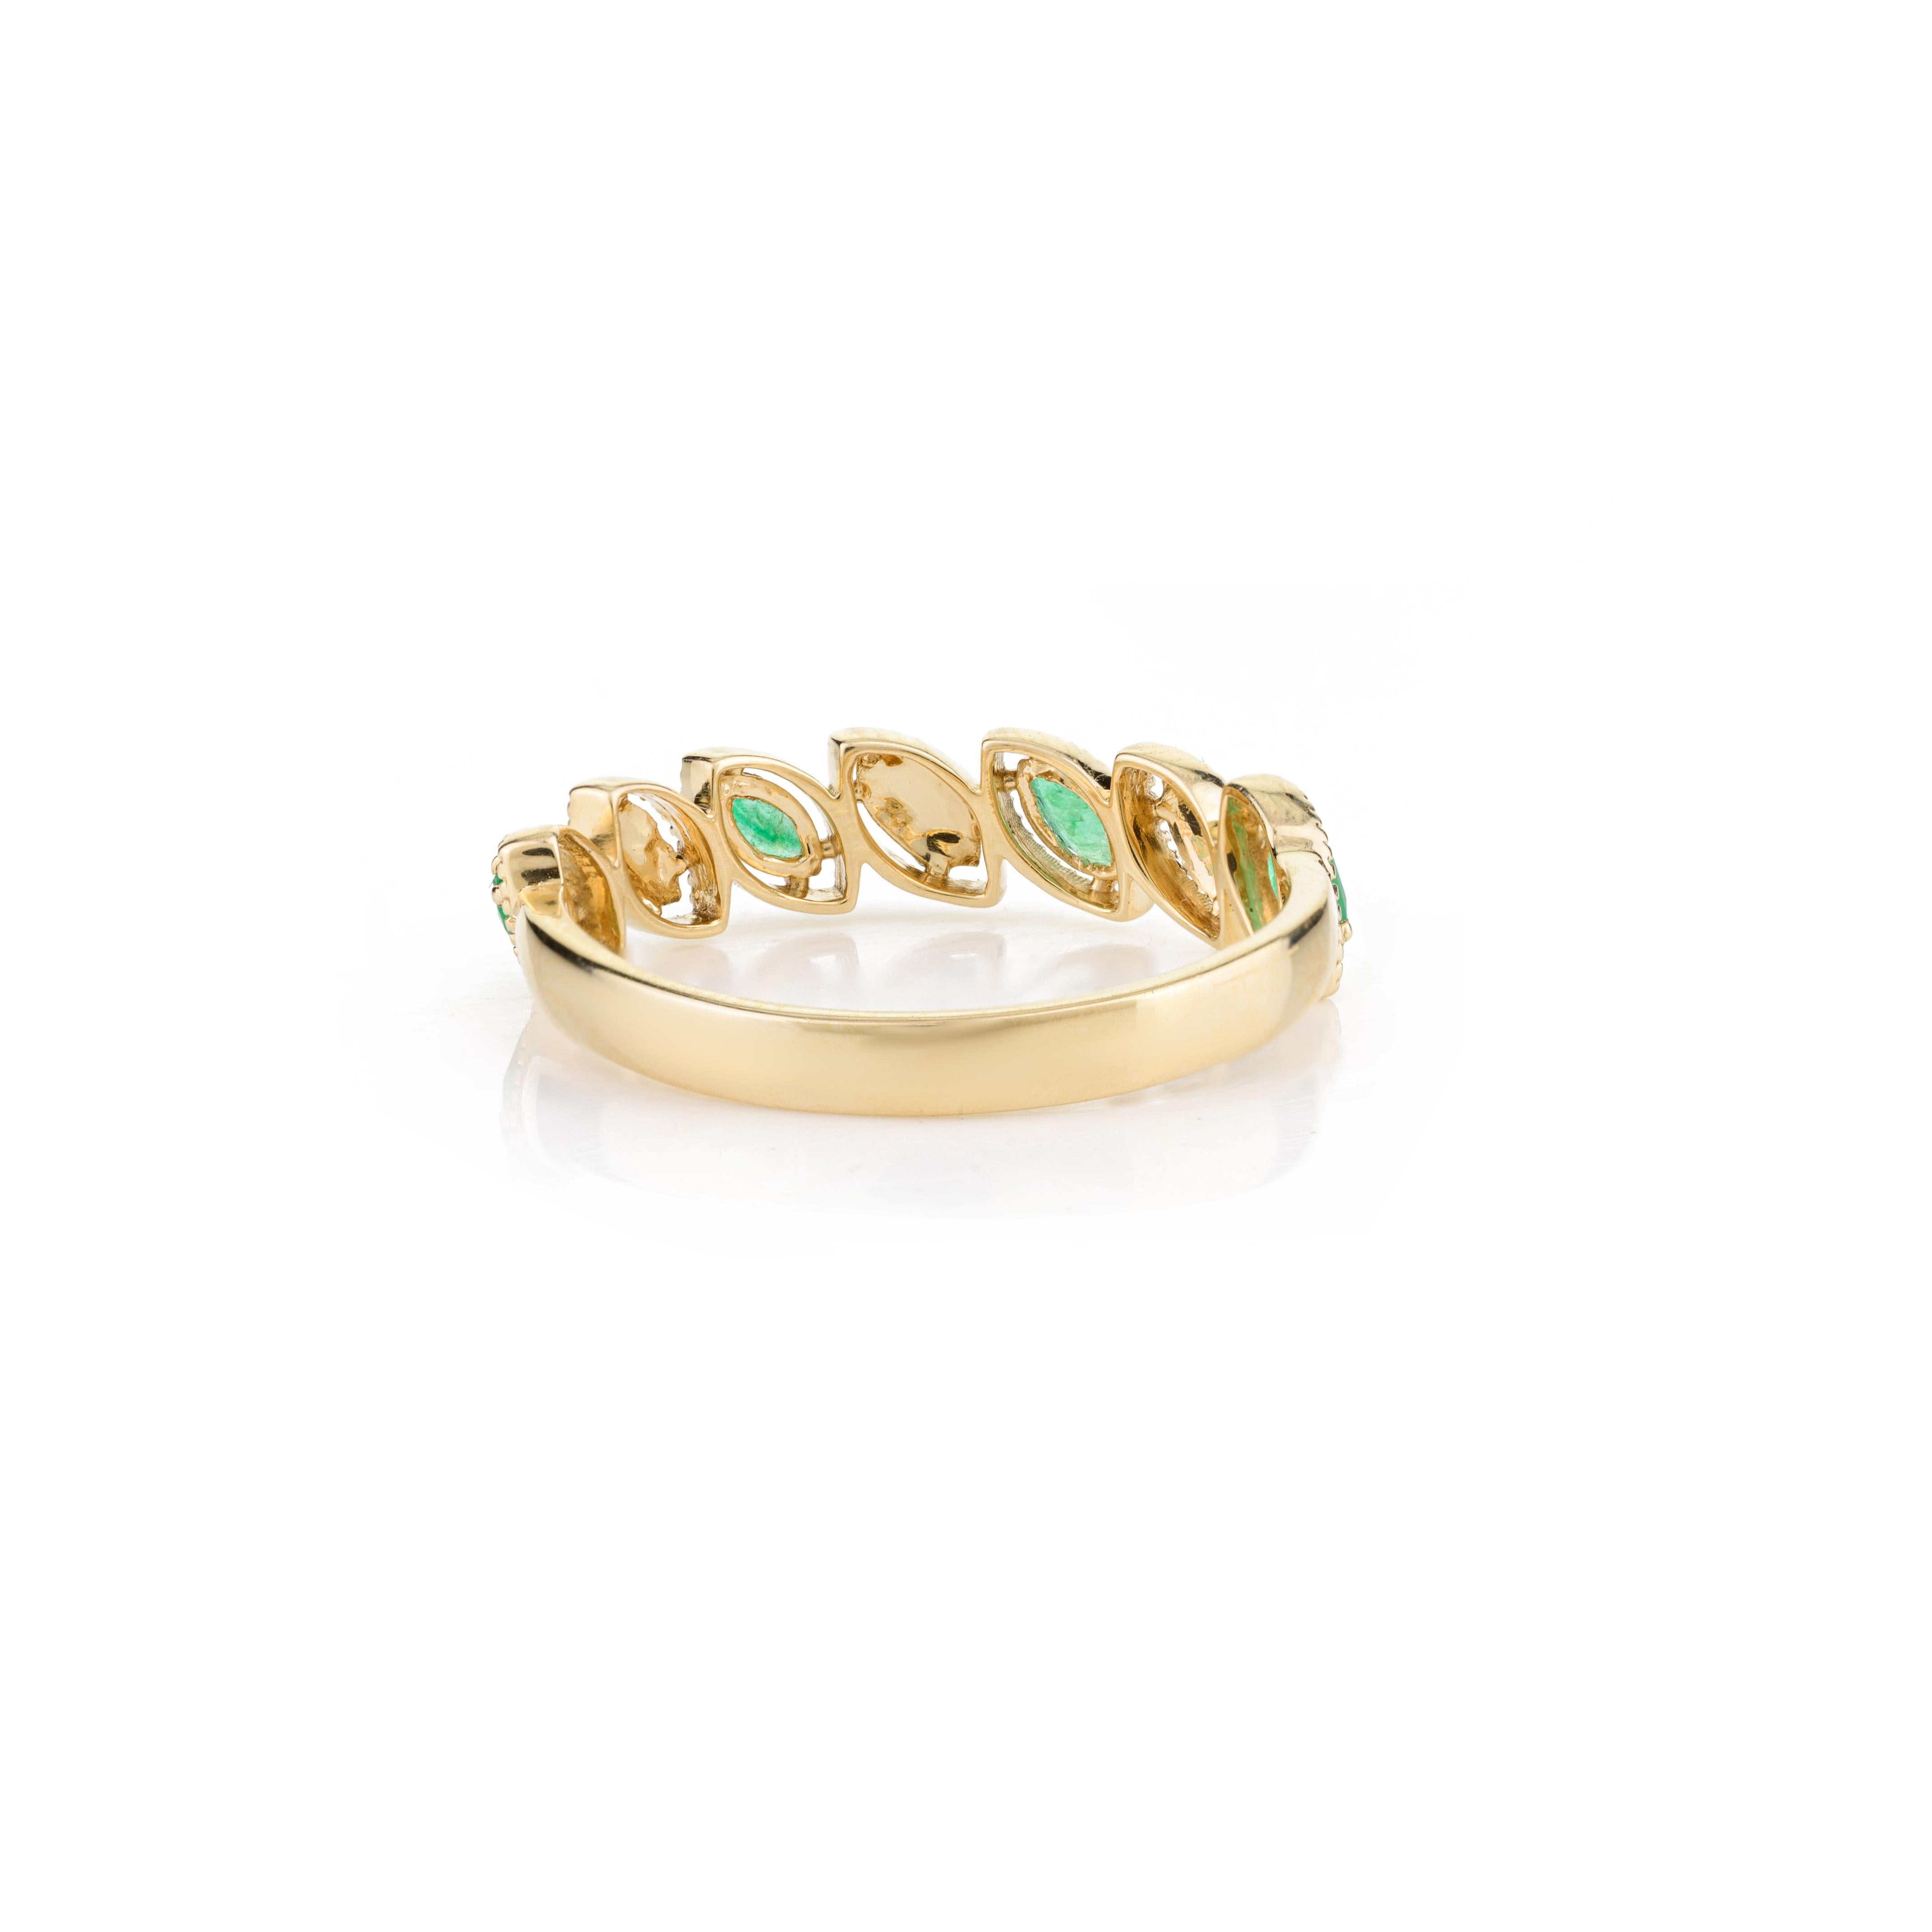 For Sale:  Delicate Emerald Birthstone Band Ring for Her in 14k Solid Yellow Gold 9